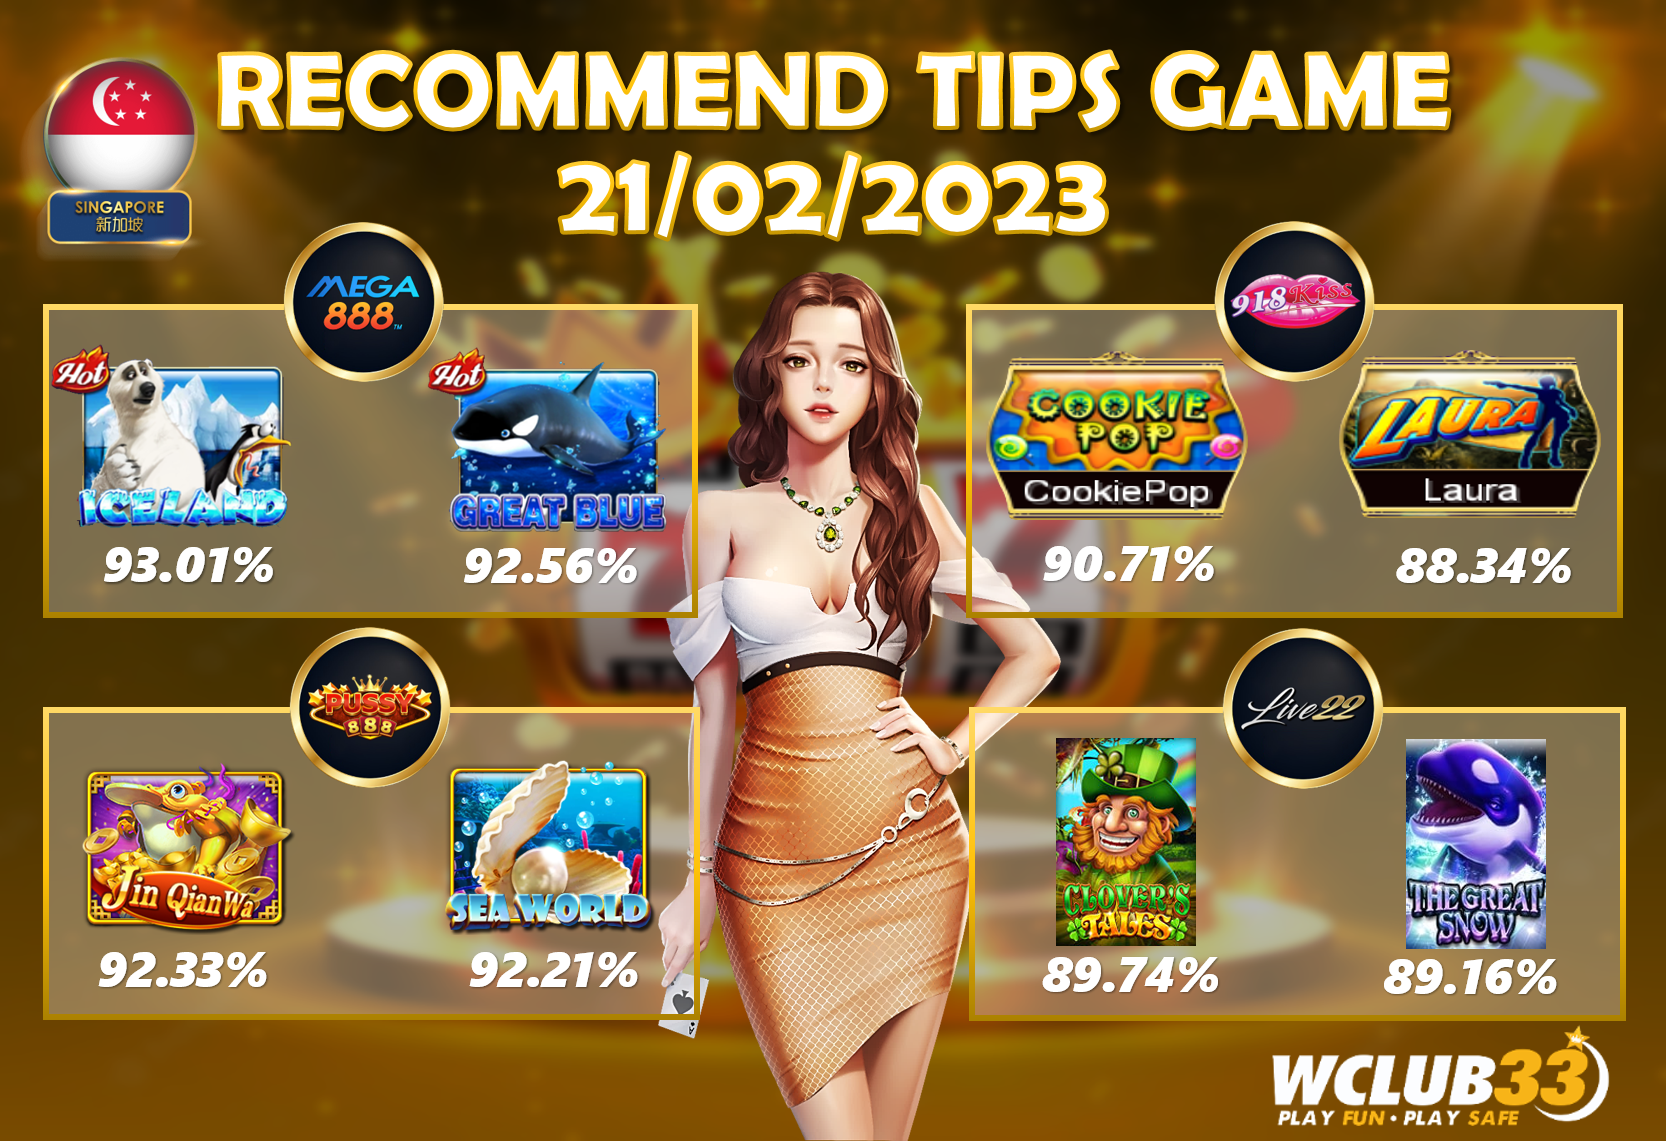 UPDATE TIPS GAME 21/02